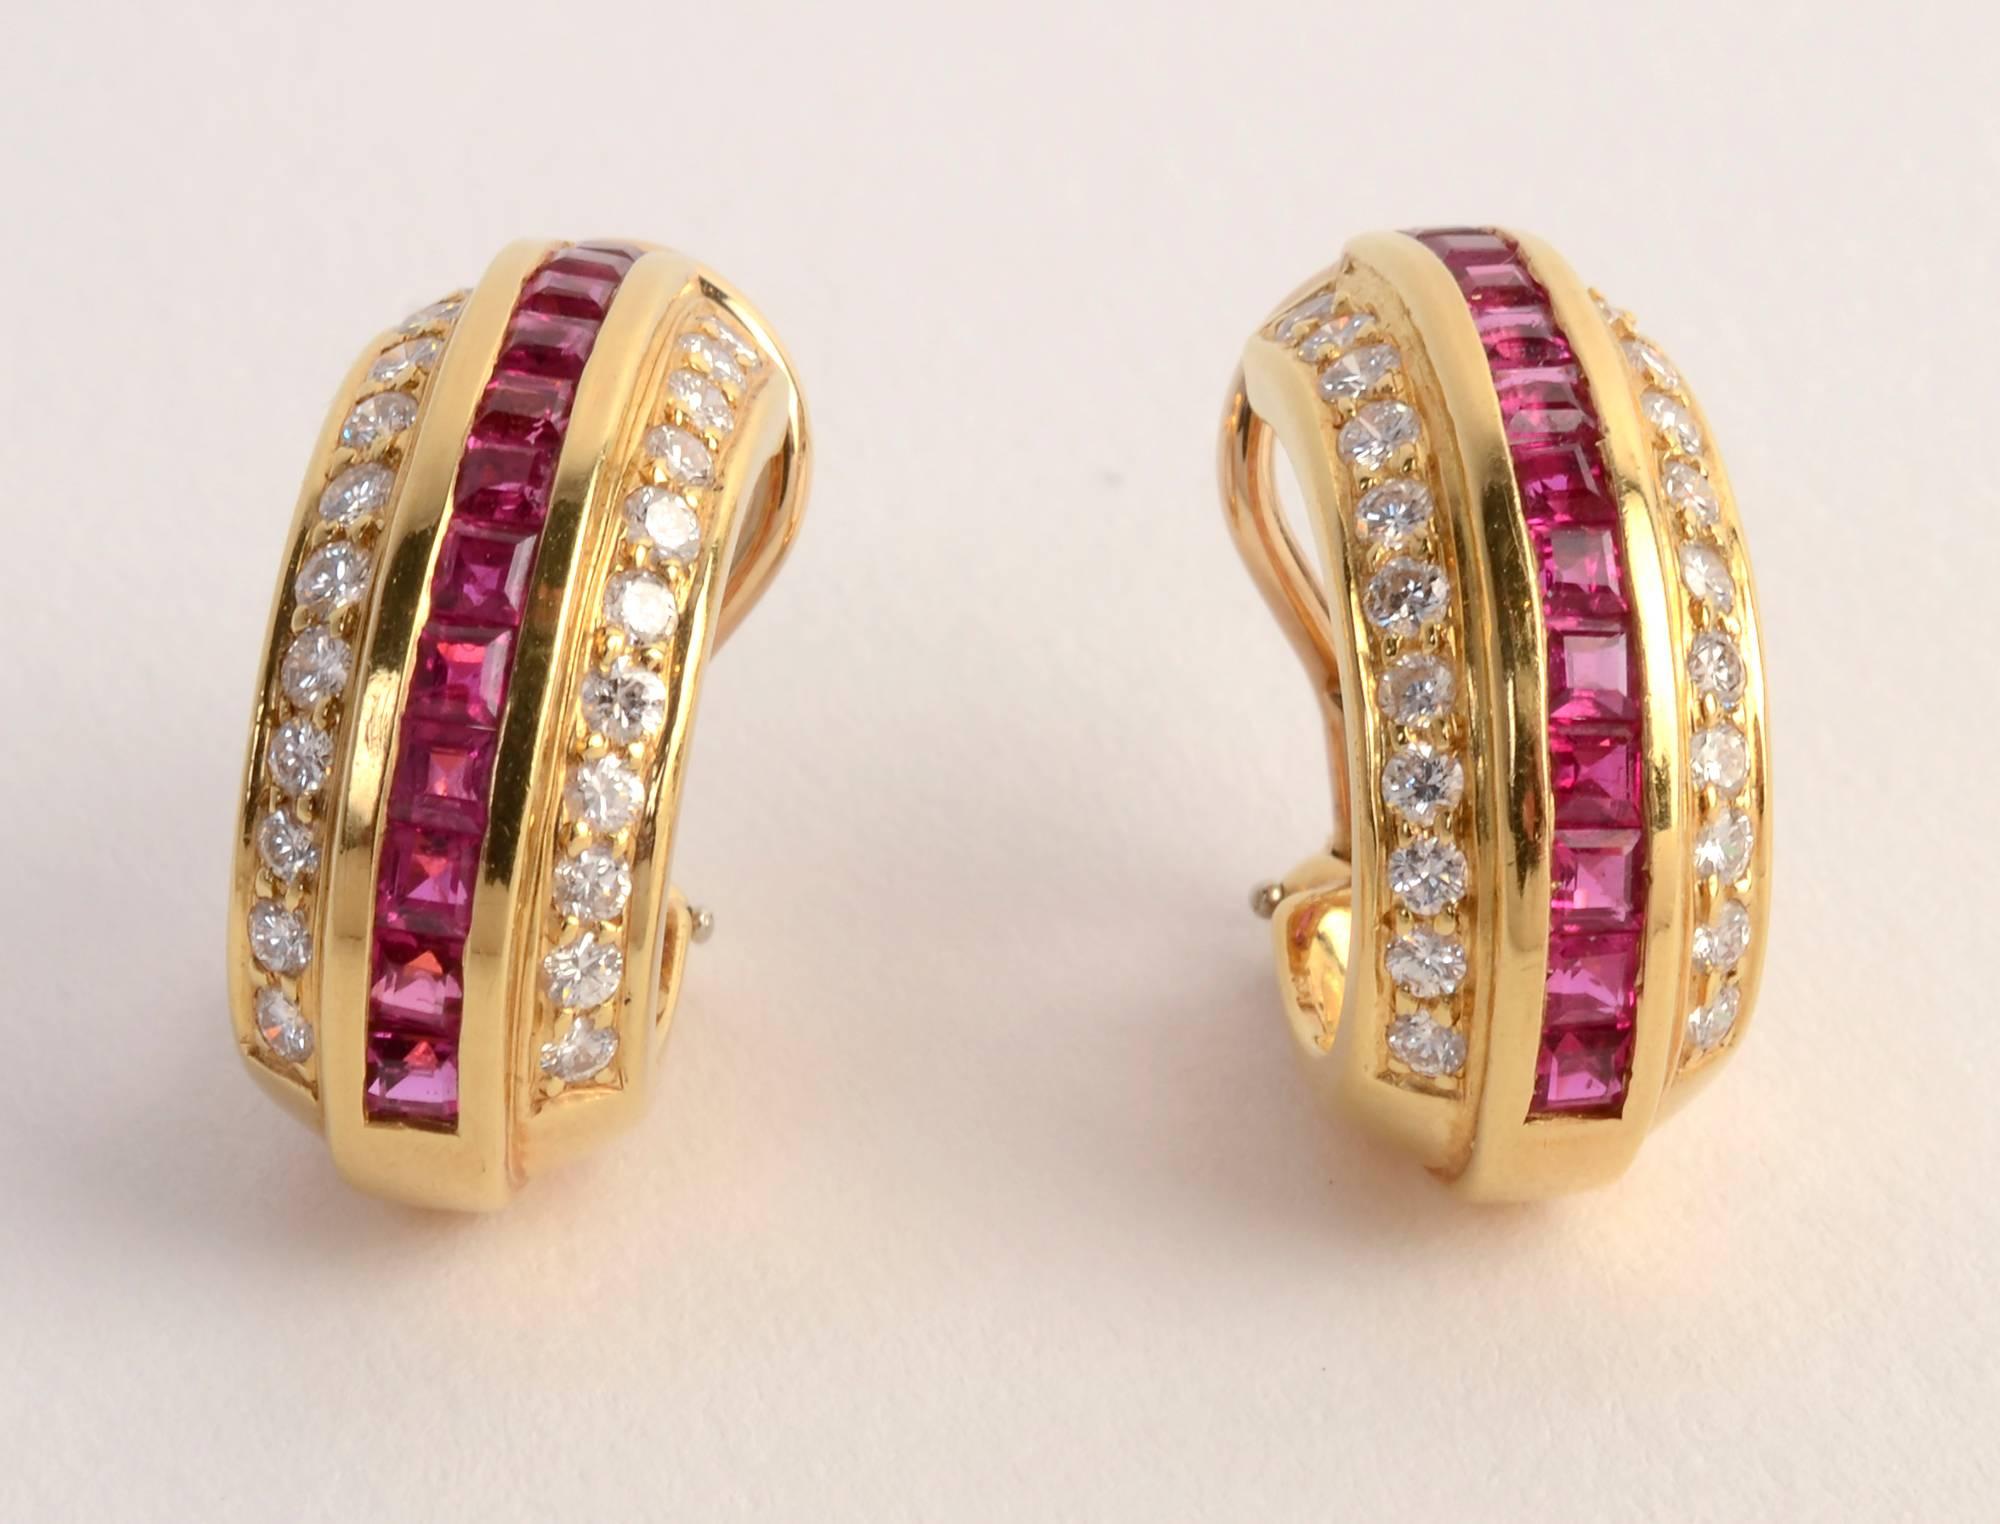 Elegant ruby and diamond oval hoop earrings by Cartier. There are 44 round diamonds weighing a total of .88 carats. Backs are posts and clips. Measurements are 3/4 inch in length and 3/8 inch  in width.